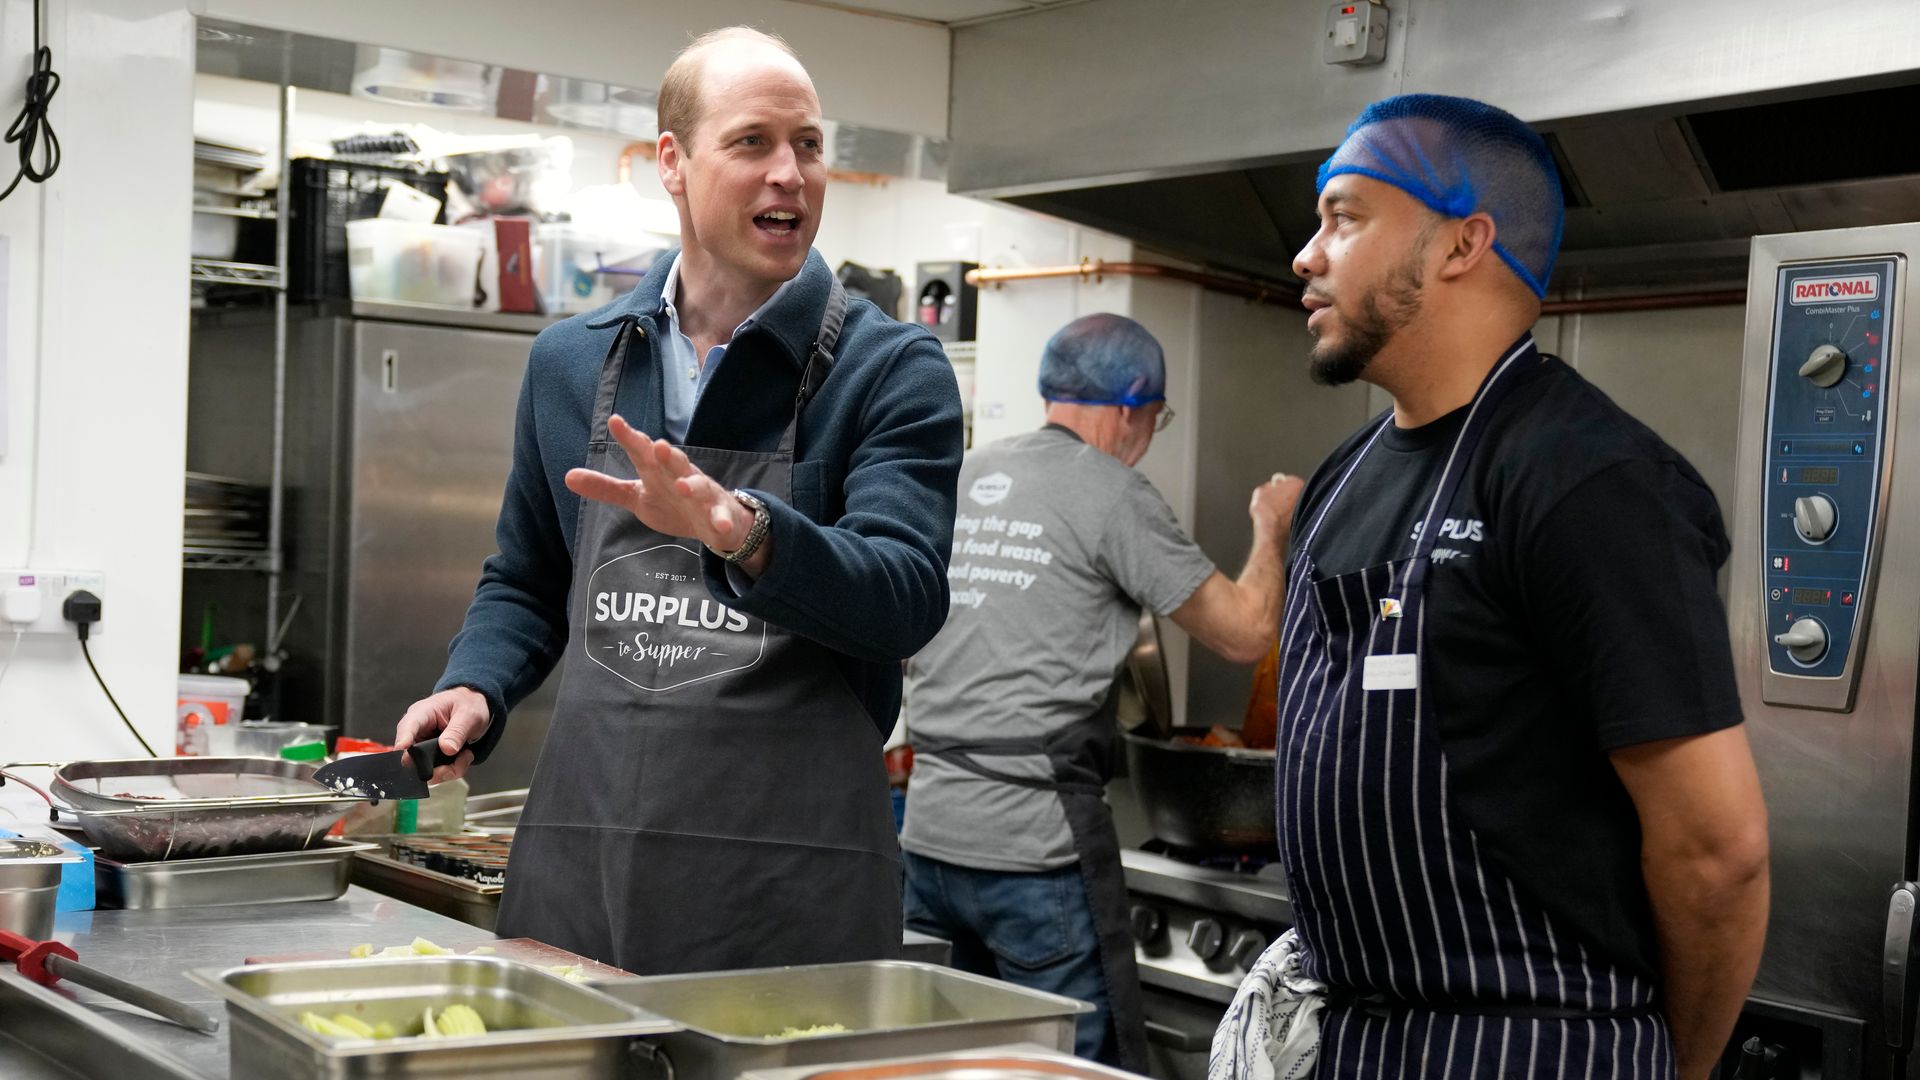 Smiling Prince William returns to work for the first time since Princess Kate's cancer diagnosis